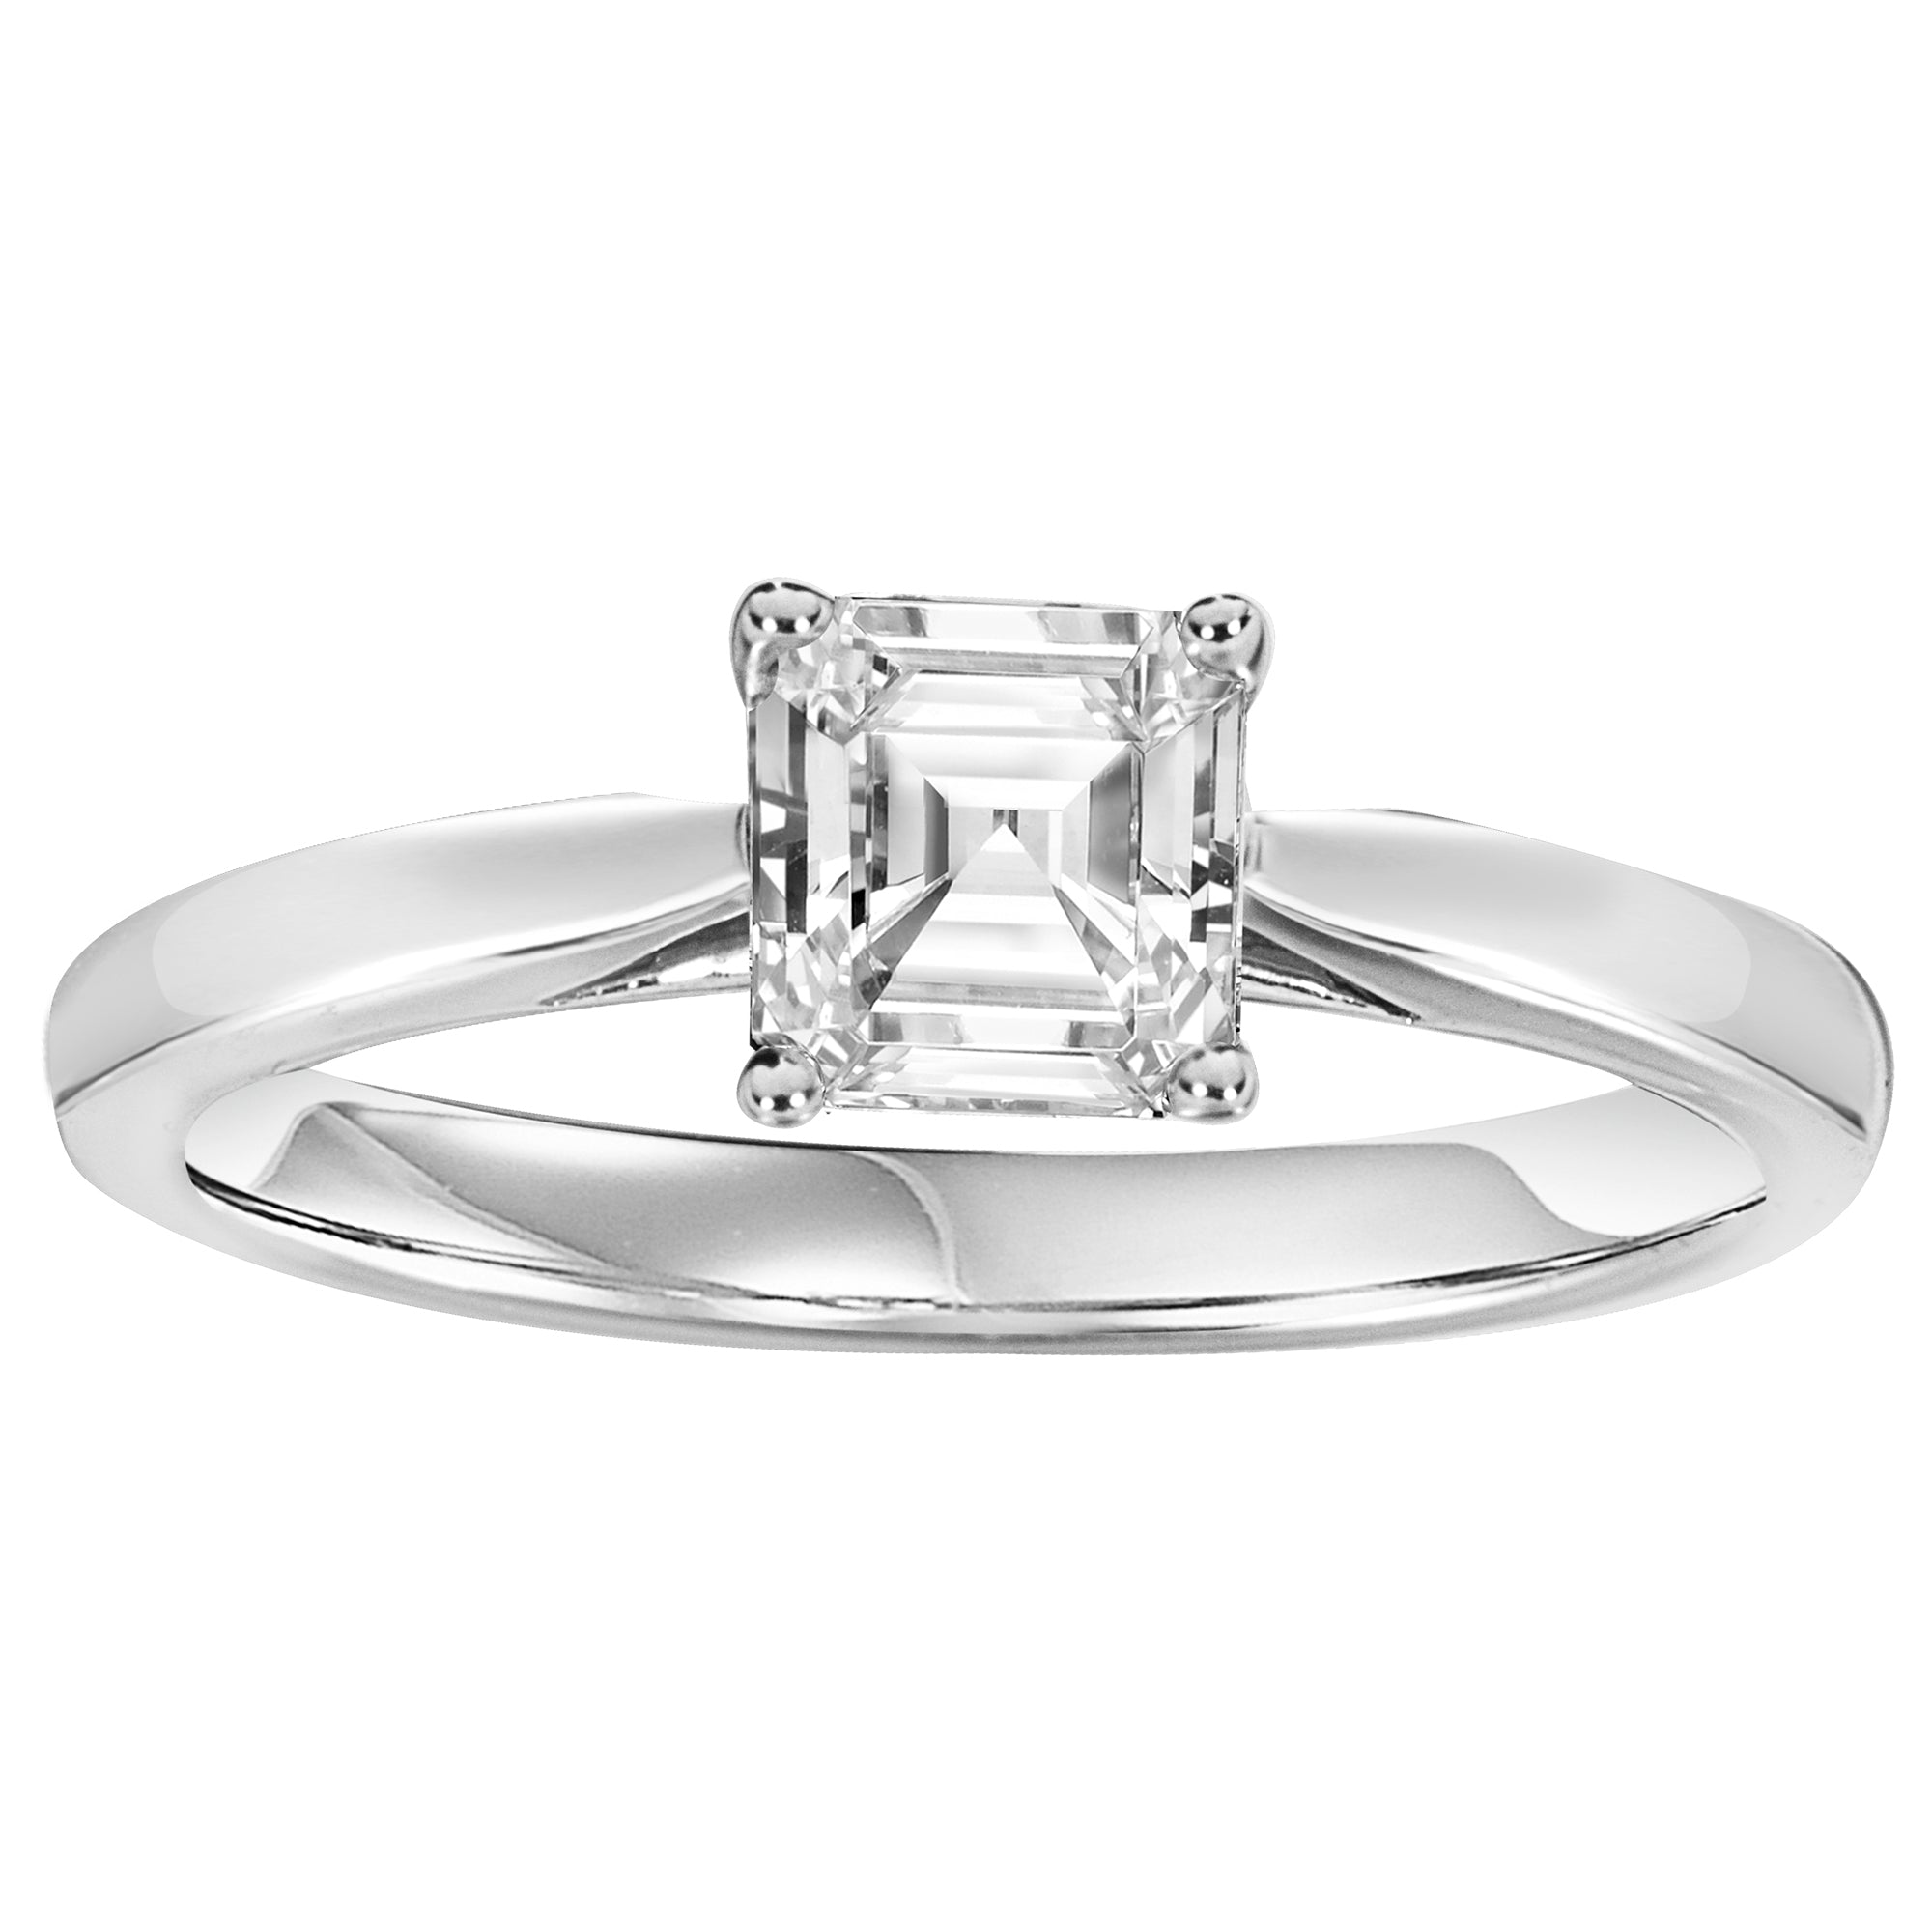 Sterling Silver Cubic Zirconia 1.00ct Ring - AK1044 - Hallmark Jewellers Formby & The Jewellers Bench Widnes